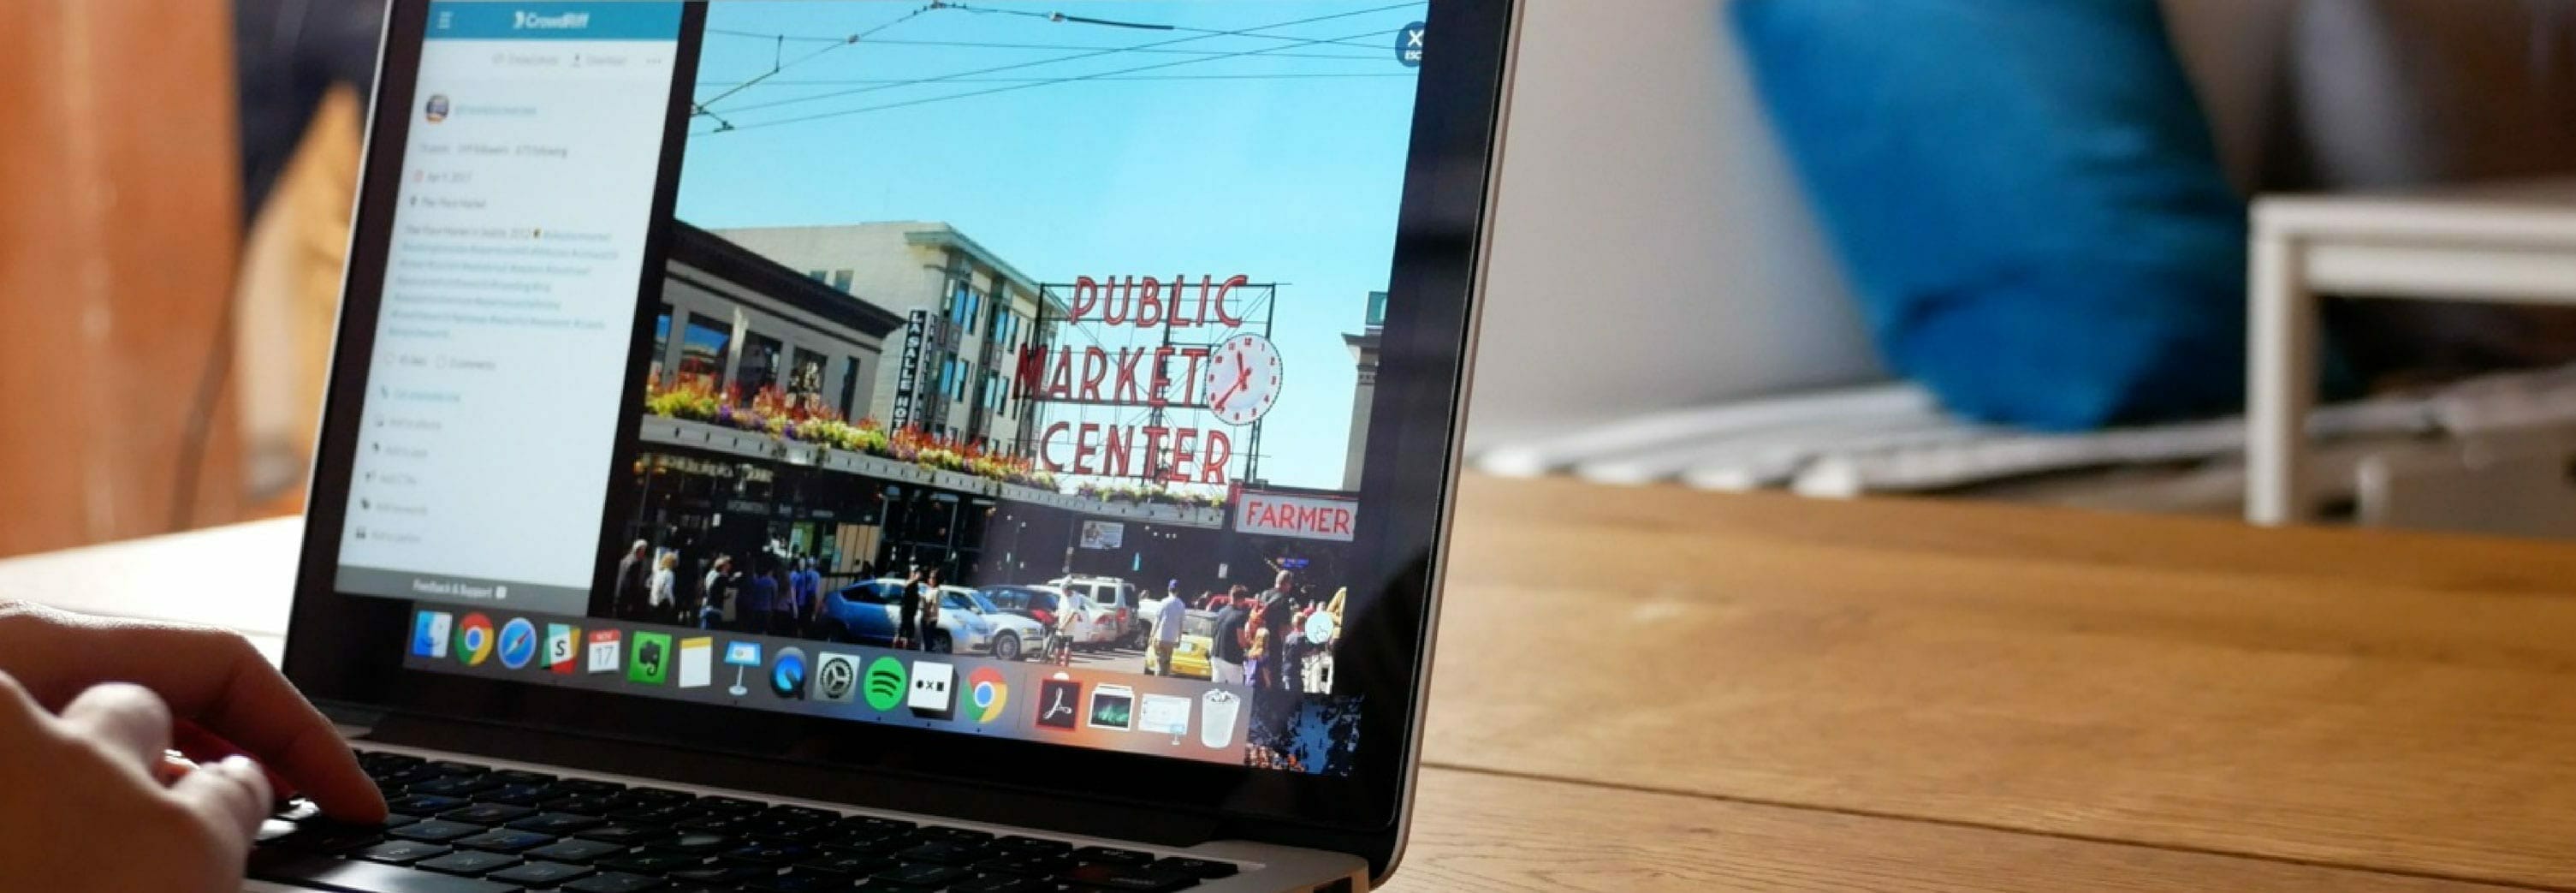 Person working on macbook on table, CrowdRiff platform on the screen with image of Public Market Center in Seattle selected